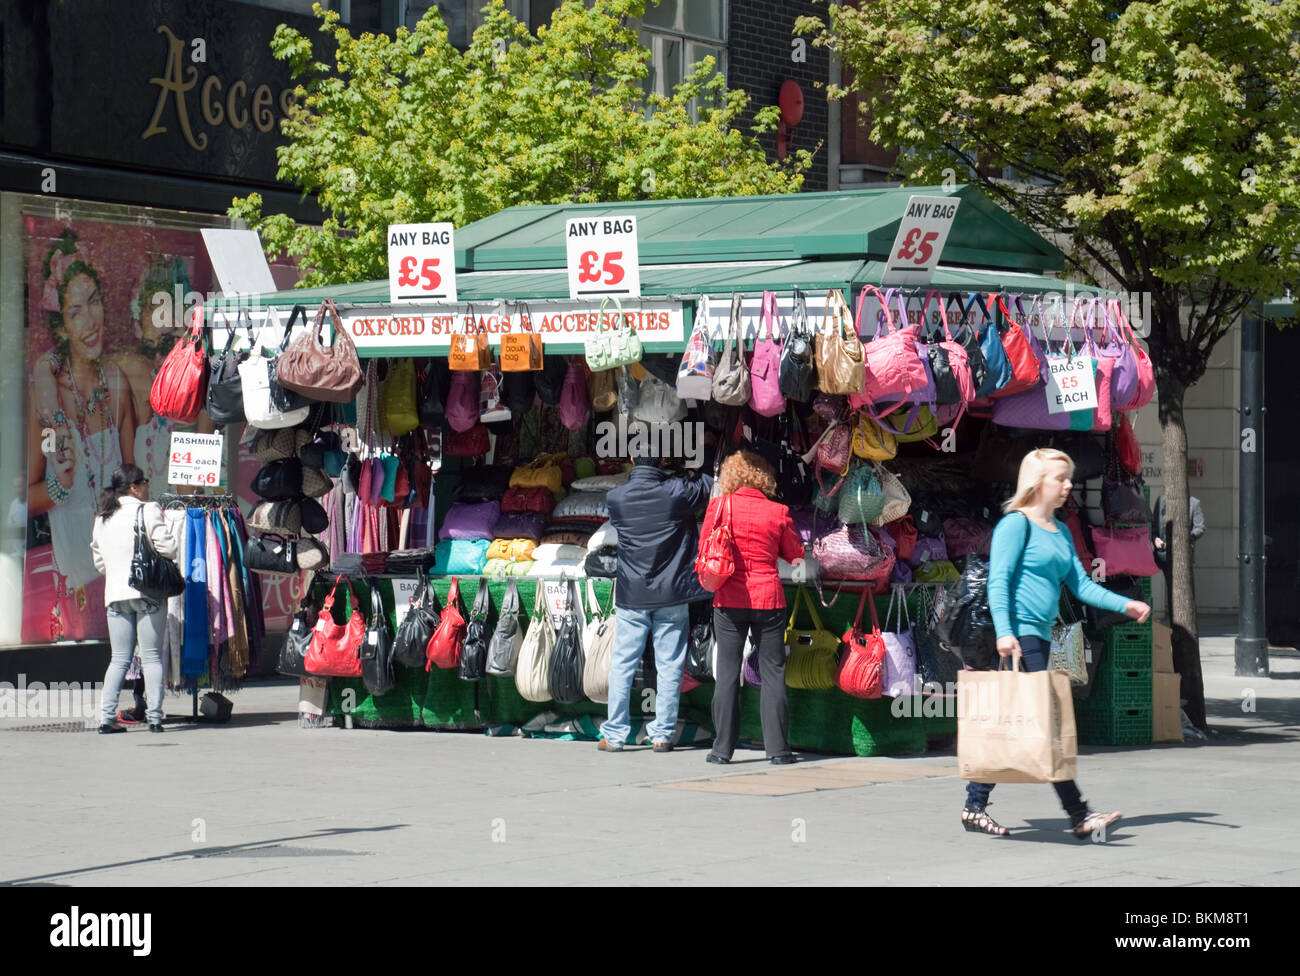 Sygdom nål Kontrovers Street market stall UK; Bags and Accessories stall, Oxford Street, London  UK Stock Photo - Alamy